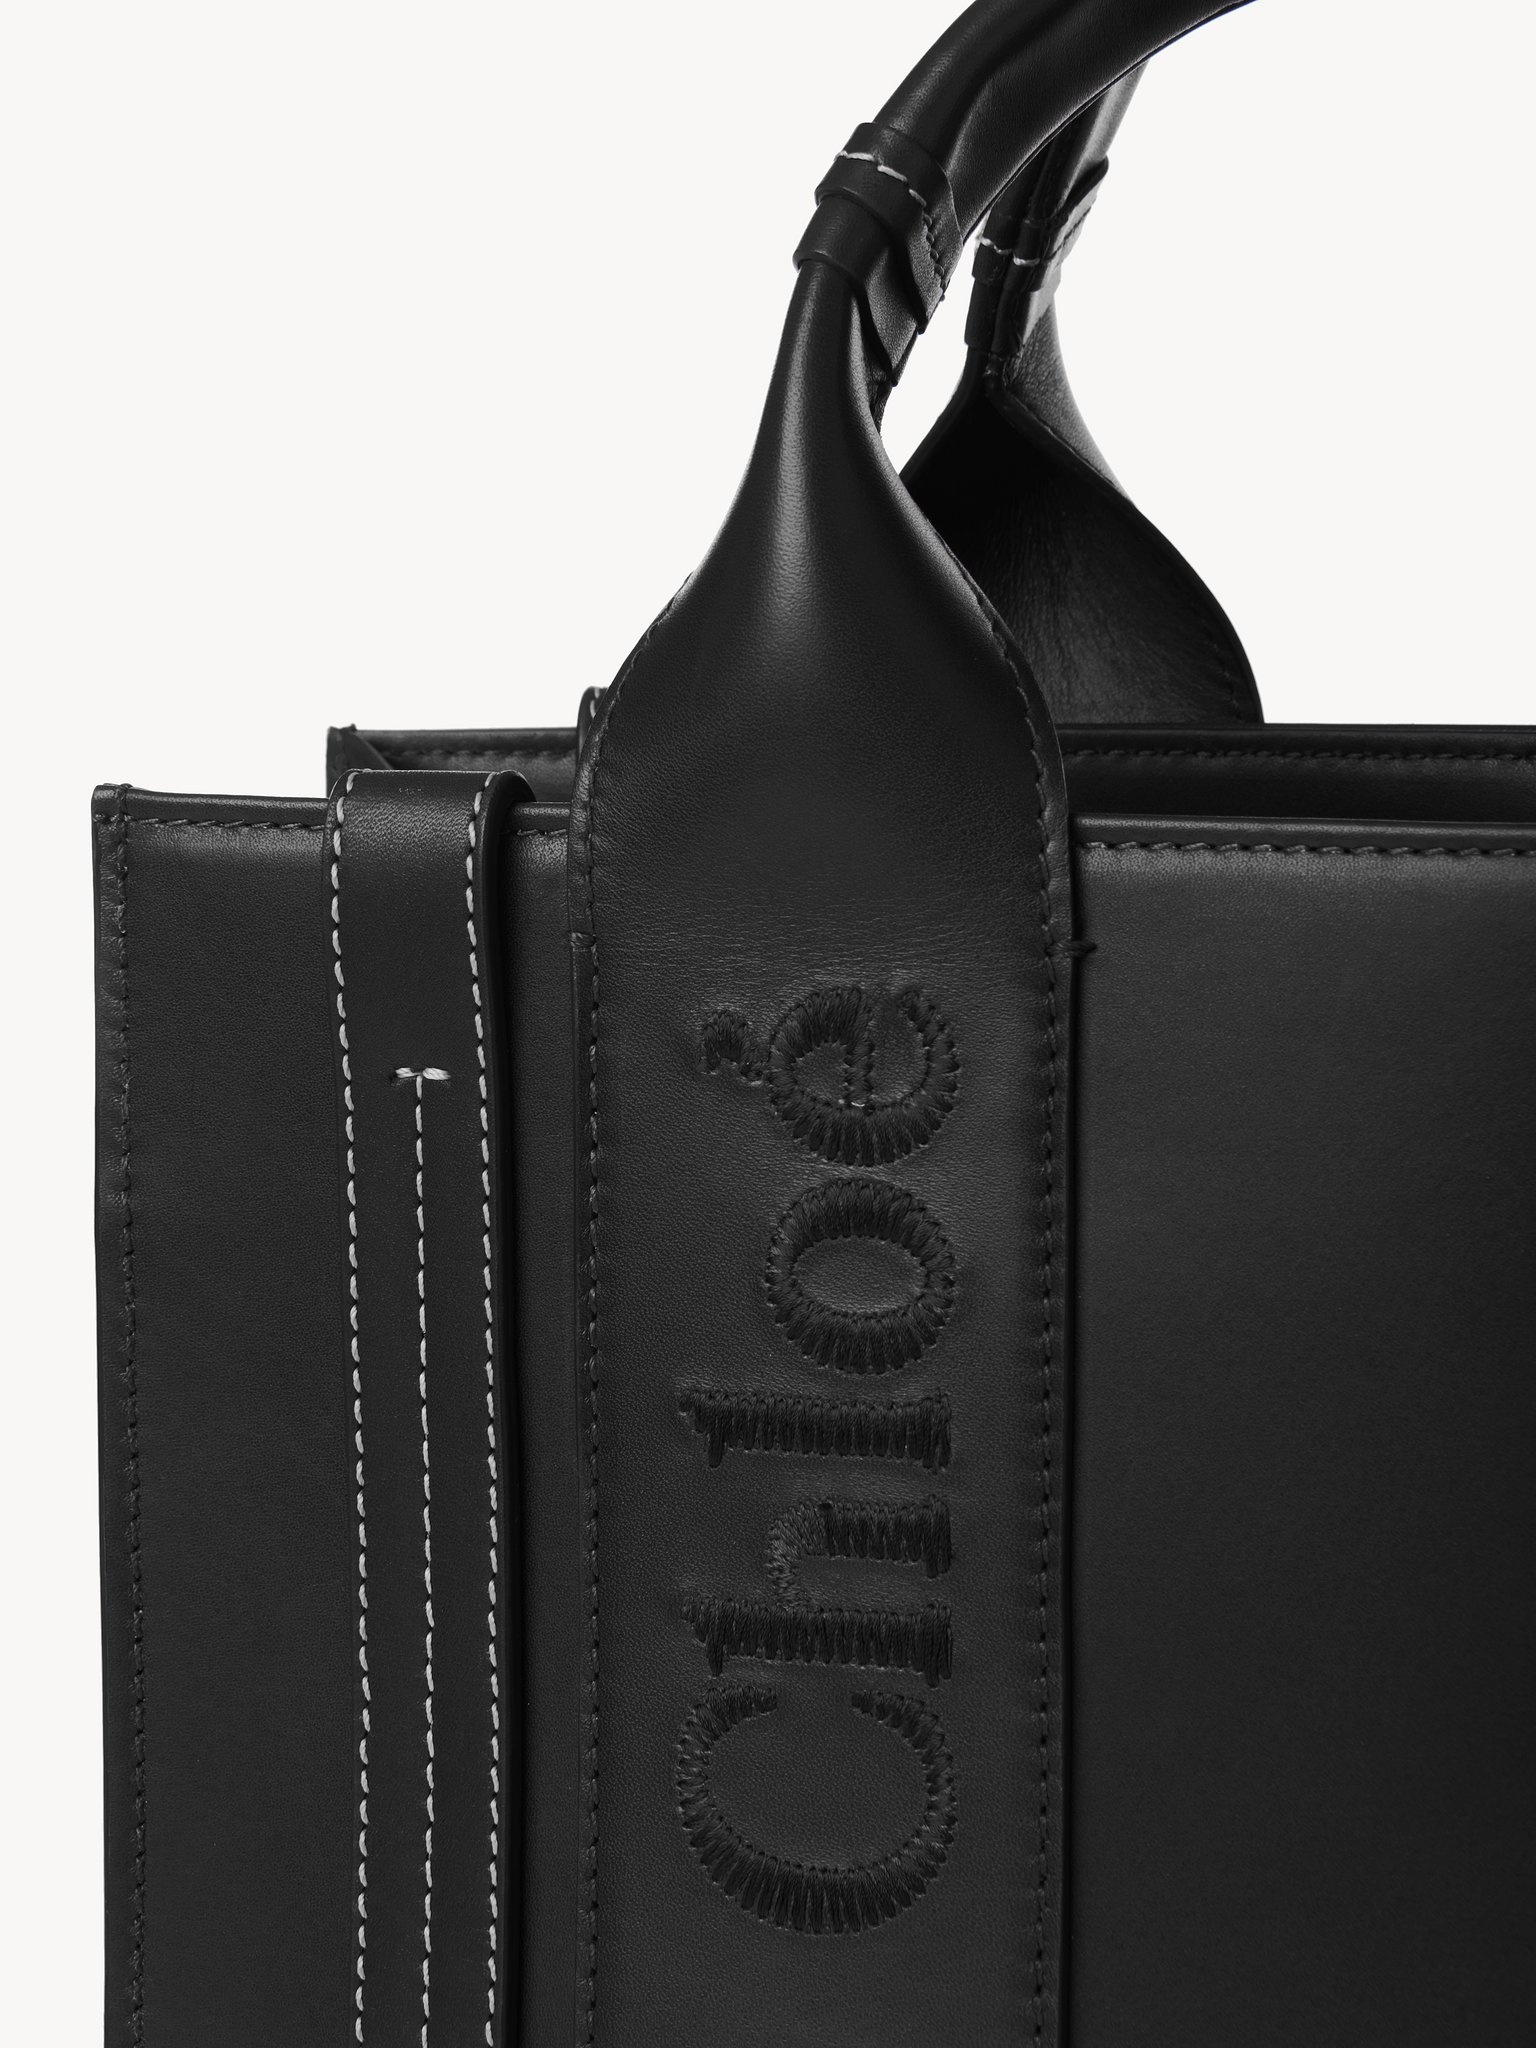 Chloé Small Woody leather tote bag - Black